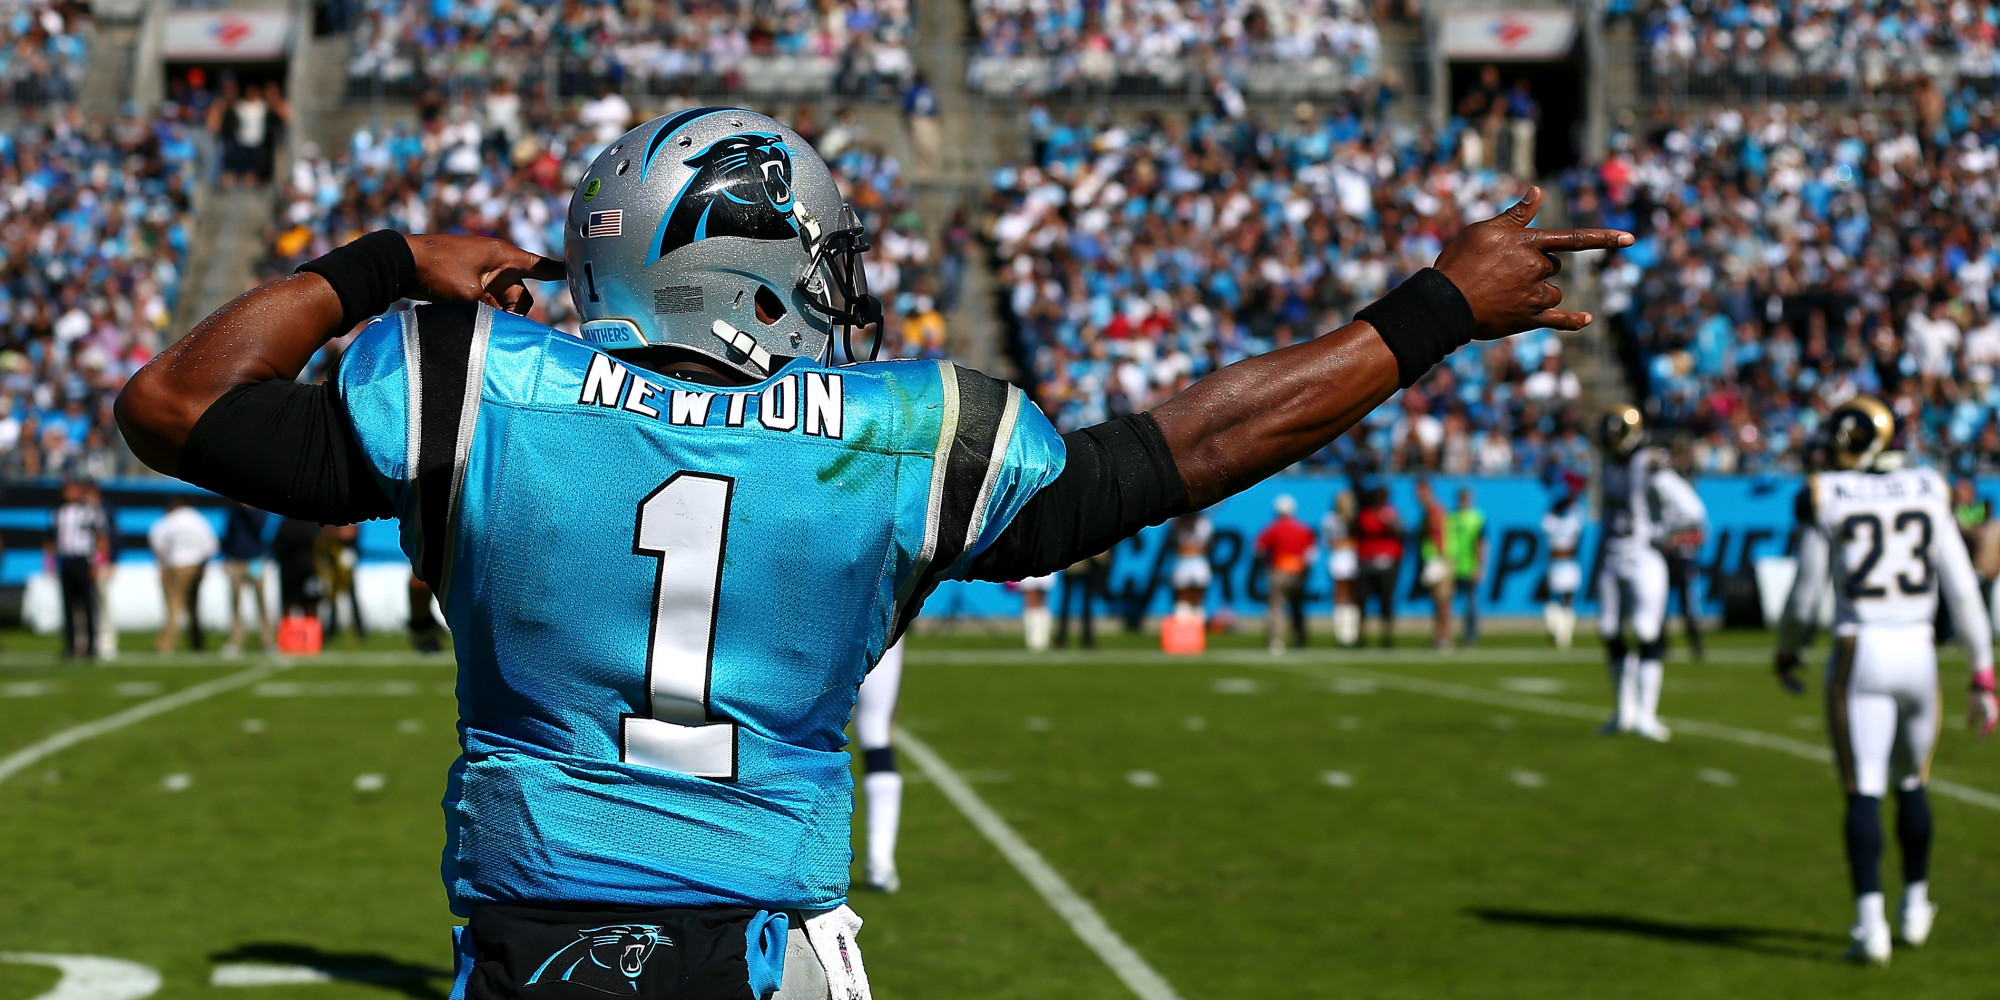 Panthers Fan Takes His Cam Newton Tribute Too Far Dresses Up As Car